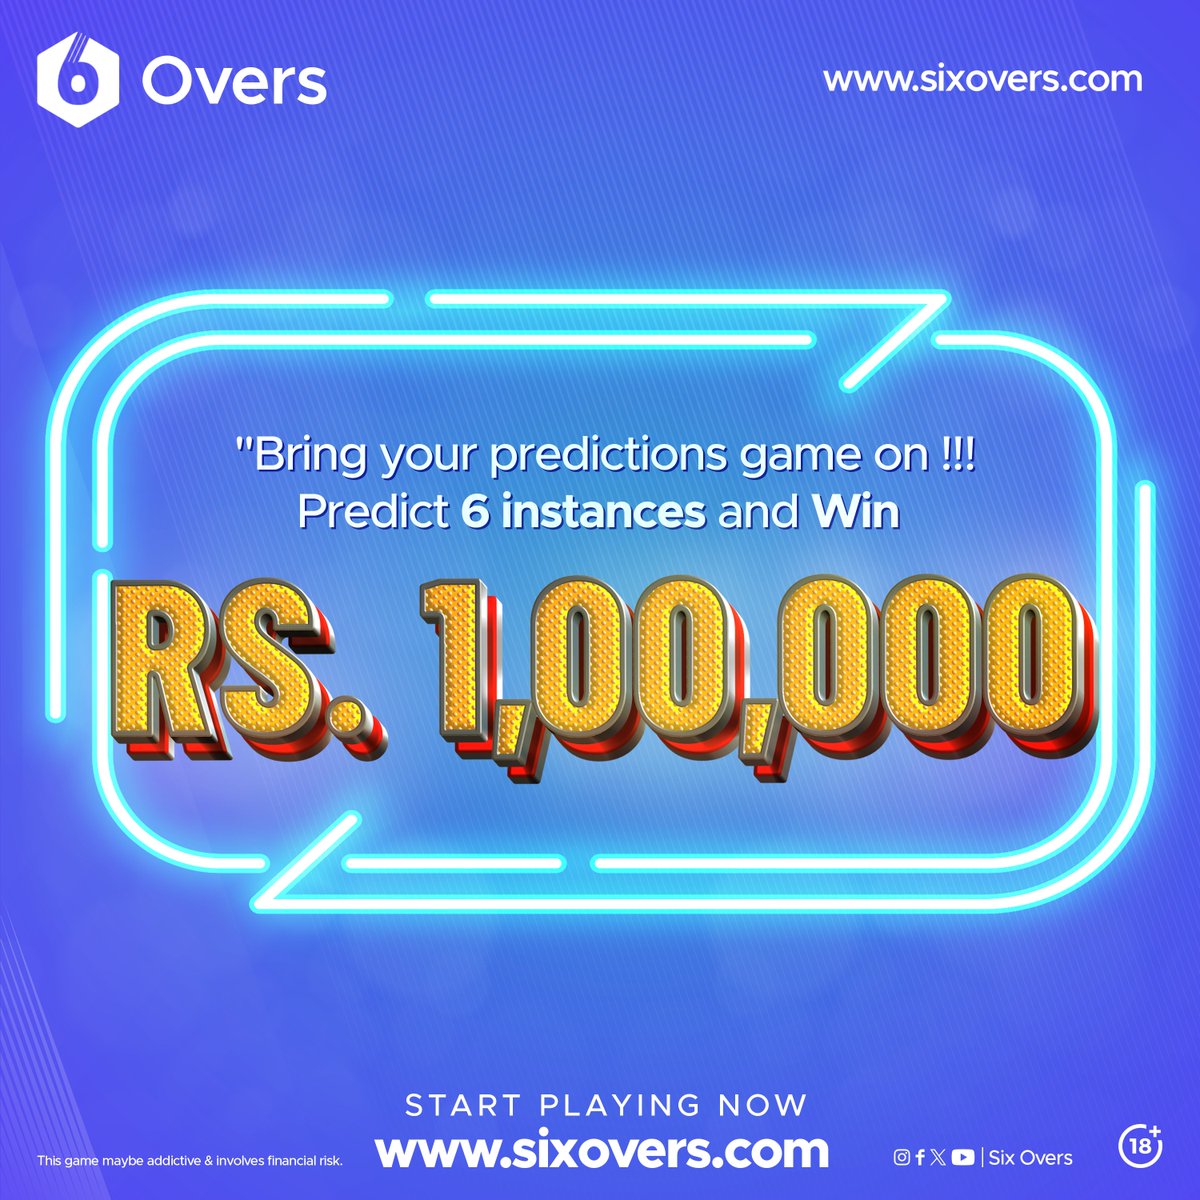 Get ready to play the prediction game! It's time to show off your skills and win big. Predict six instances, and you can win Rs. 1,00,000.

Play now: sixovers.com

#6overs #sixovers #cricketprediction #ipl2024 #PlayFantasyCricket #WinBig #CricketLovers #playwithskill